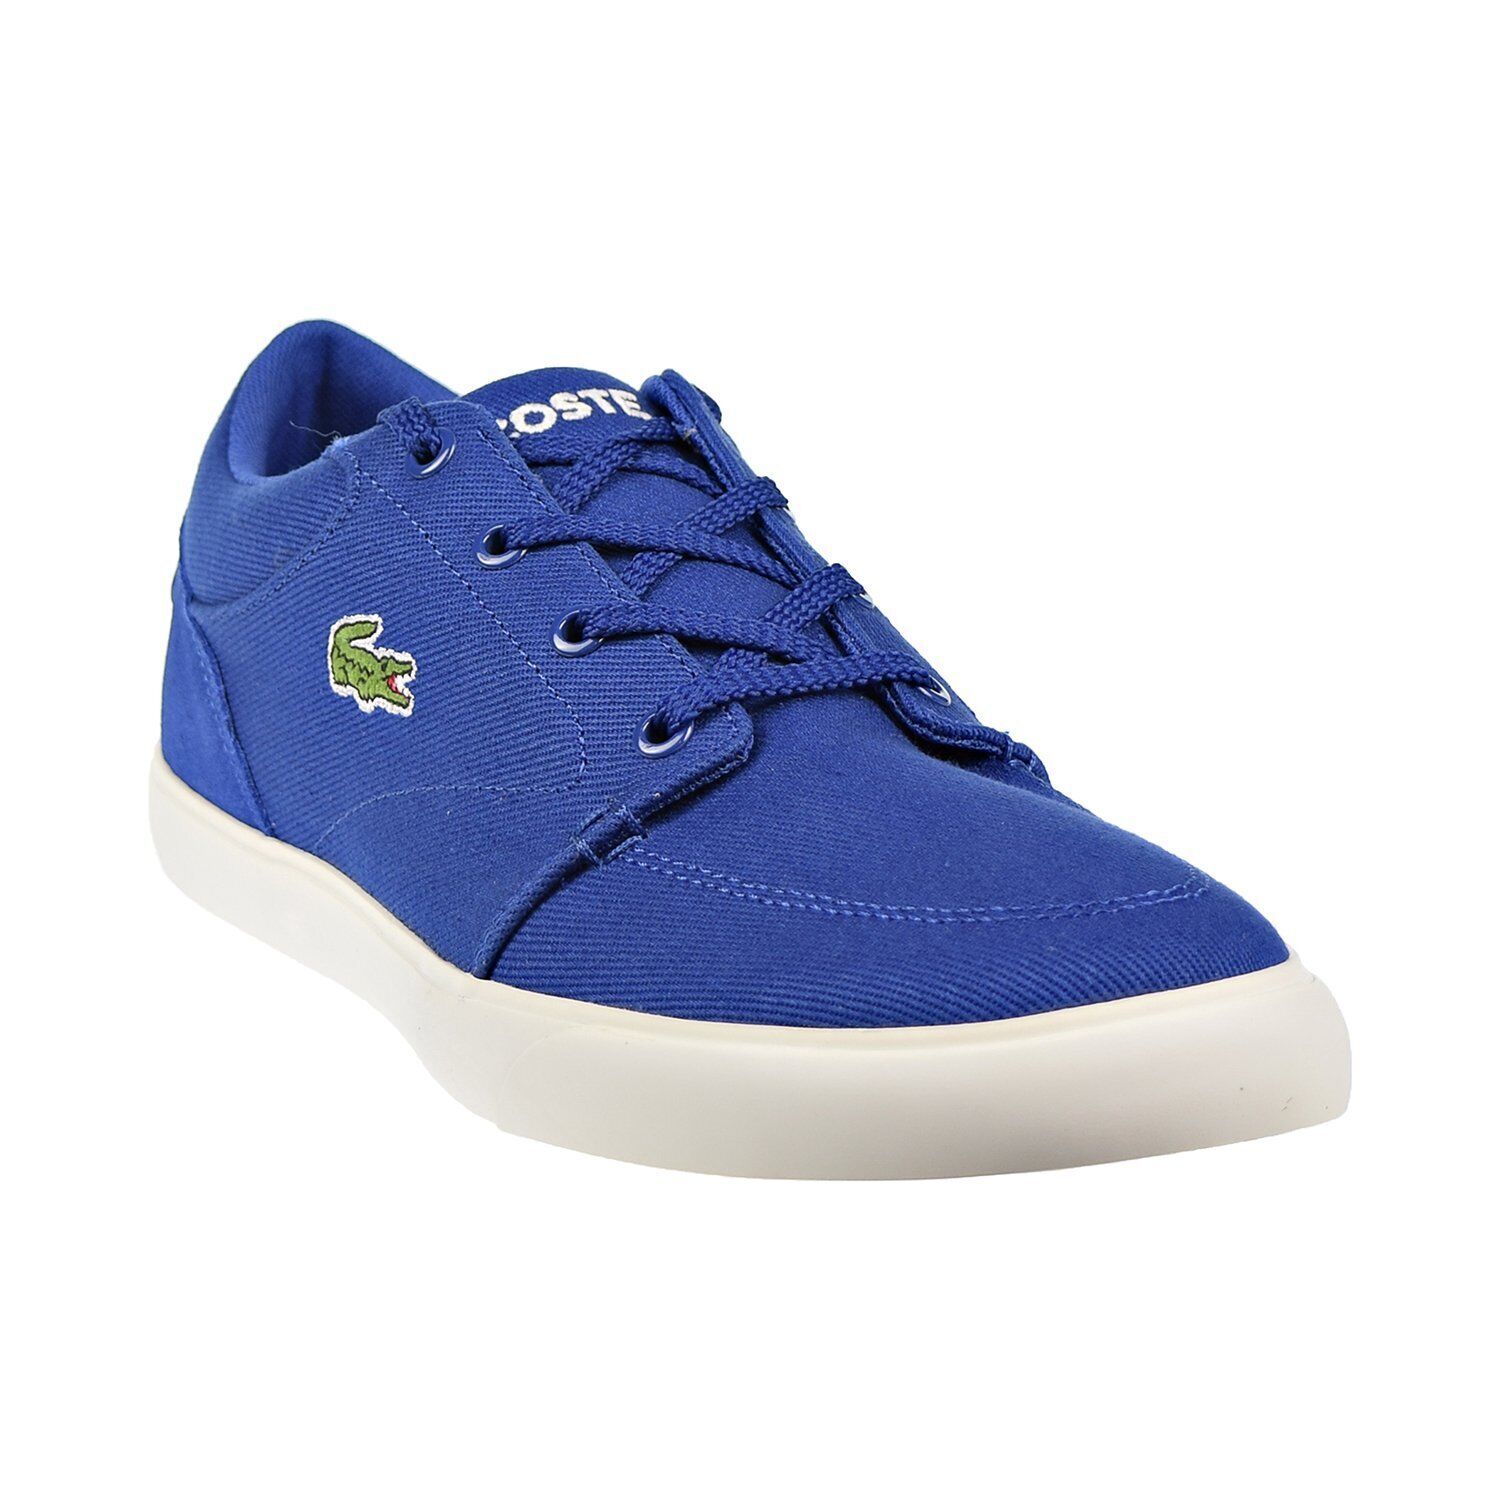 Lacoste Men Casual Fashion Sneakers Bayliss 219 Size US 12 Dark Blue Canvas - $63.86